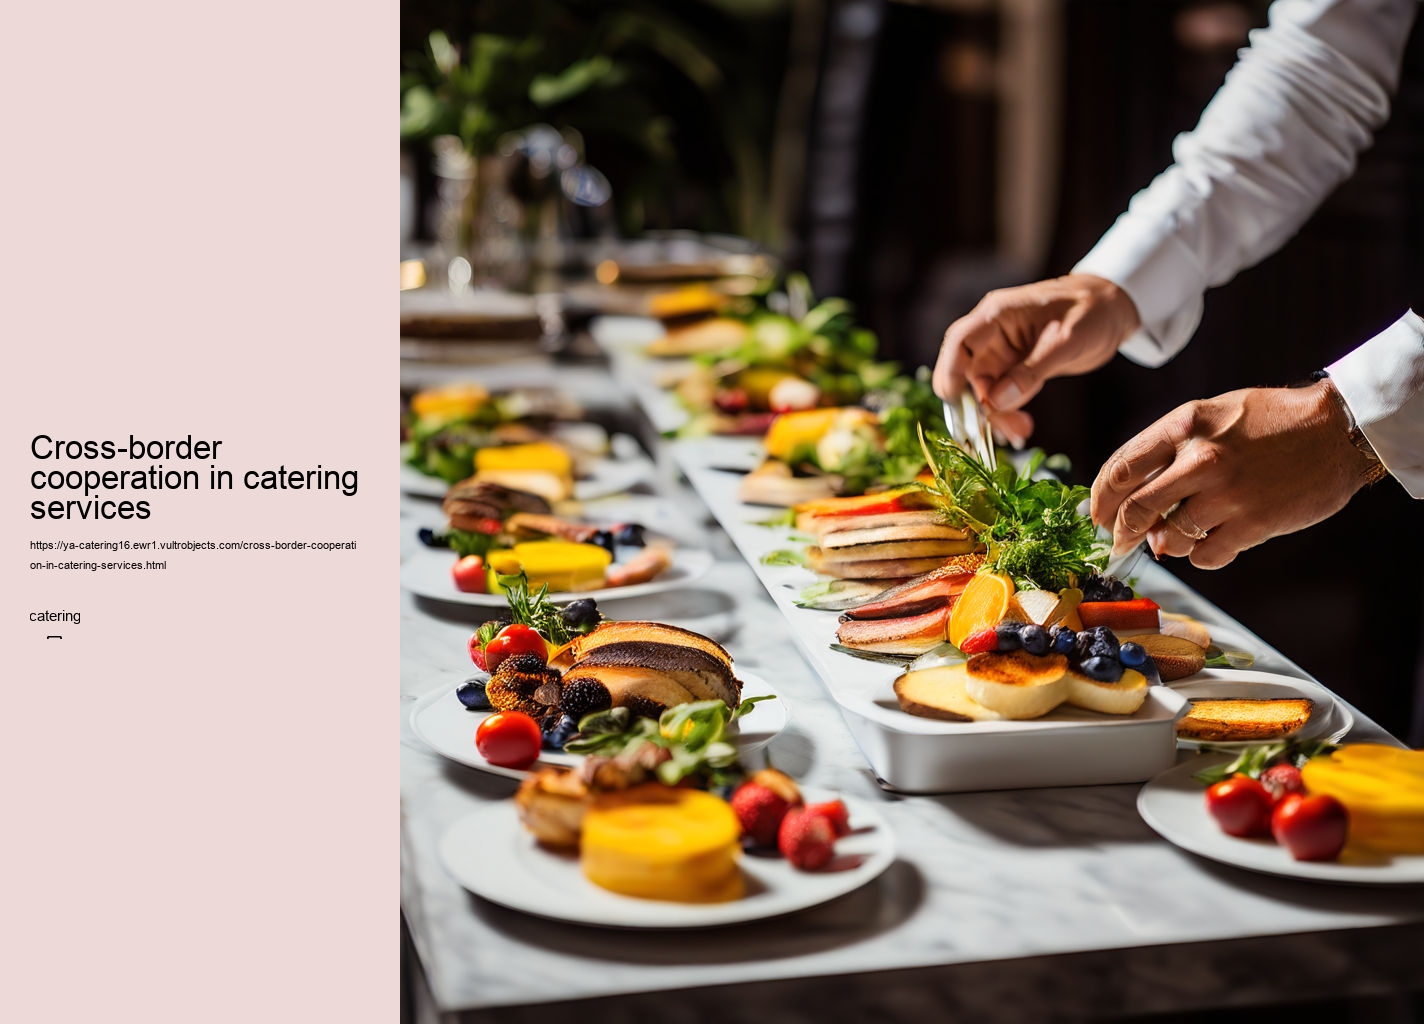 Cross-border cooperation in catering services